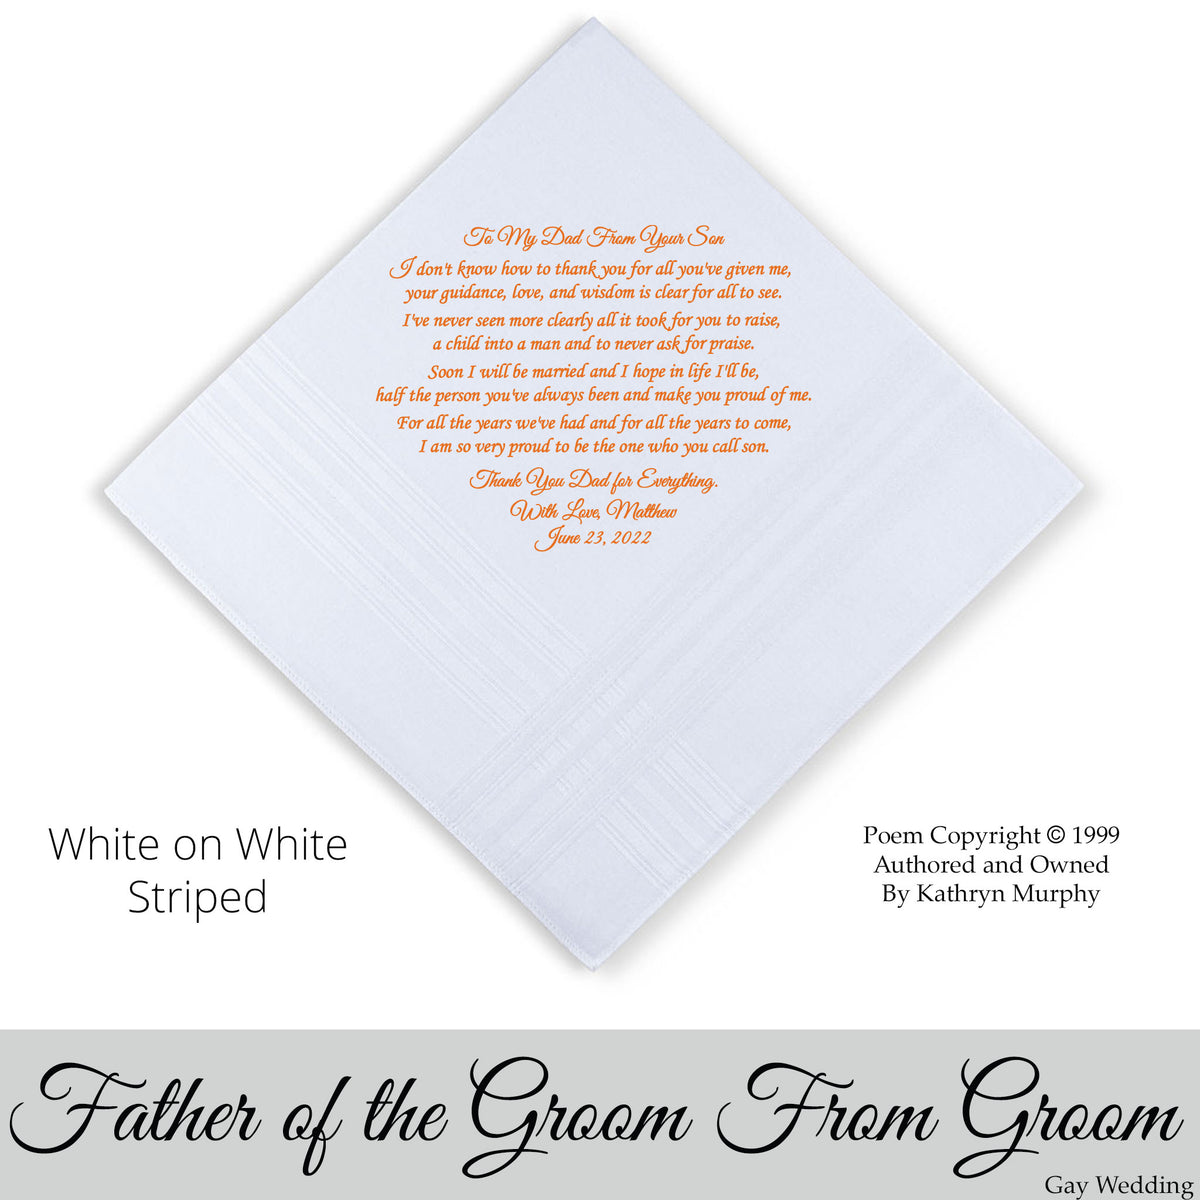 Gay Wedding Gift for the father of the Groom poem printed wedding hankie